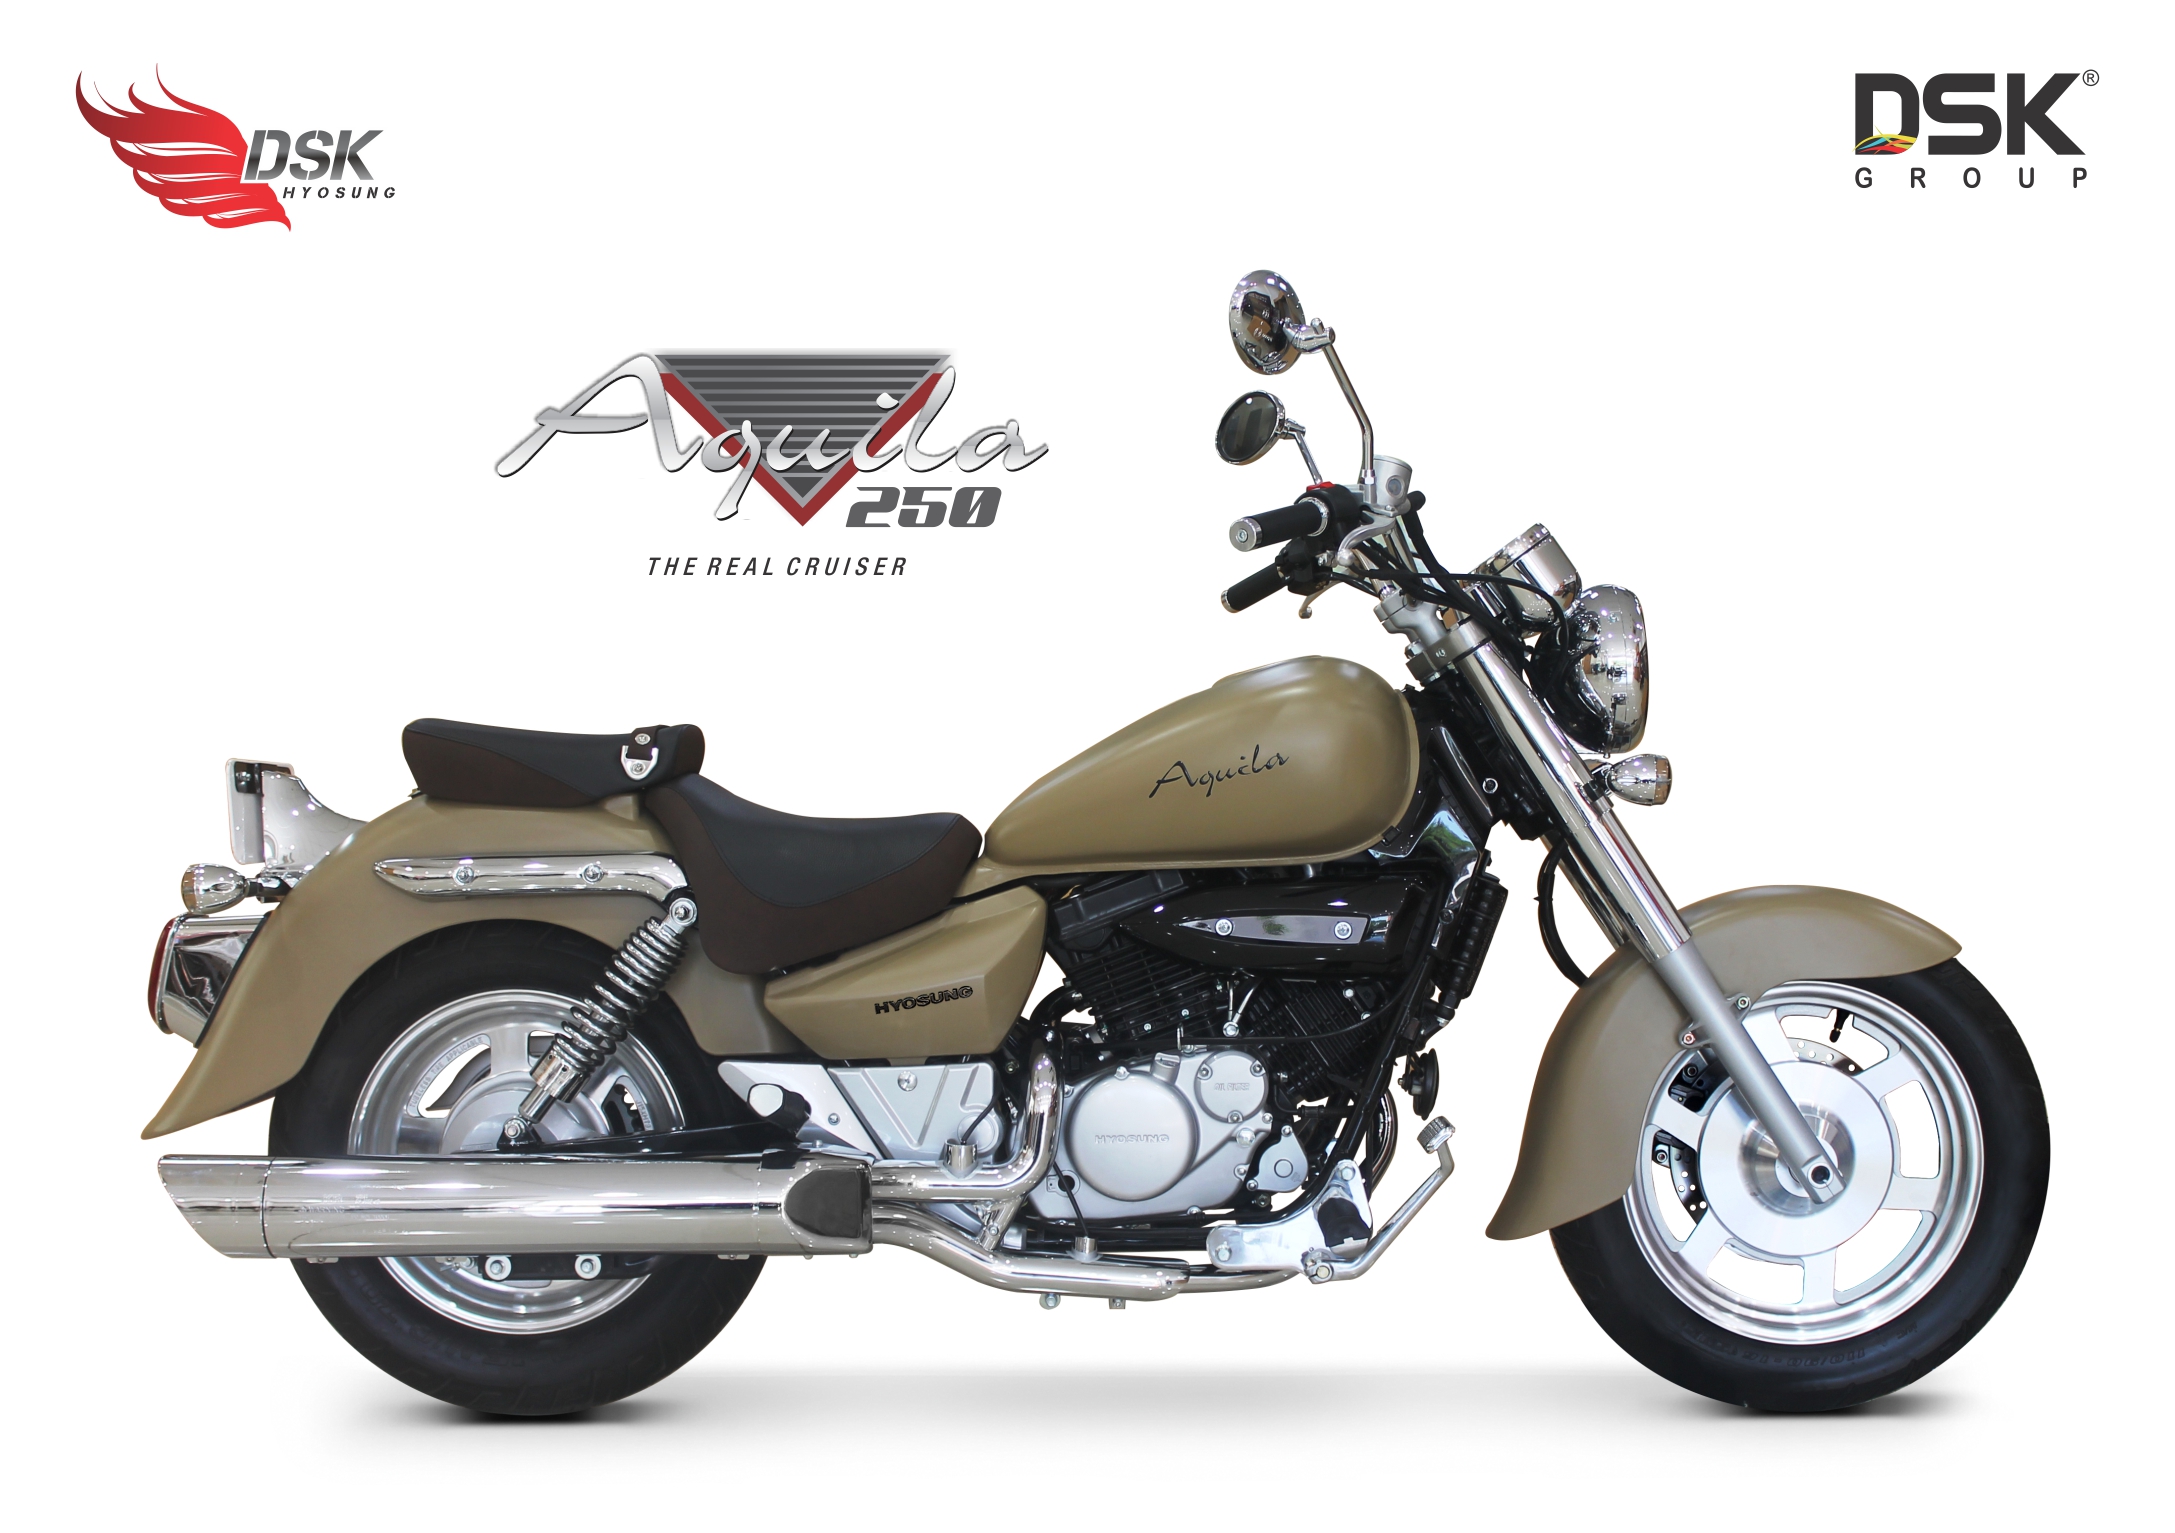 DSK Hyosung launches limited-edition Aquila for 2.94 lakh